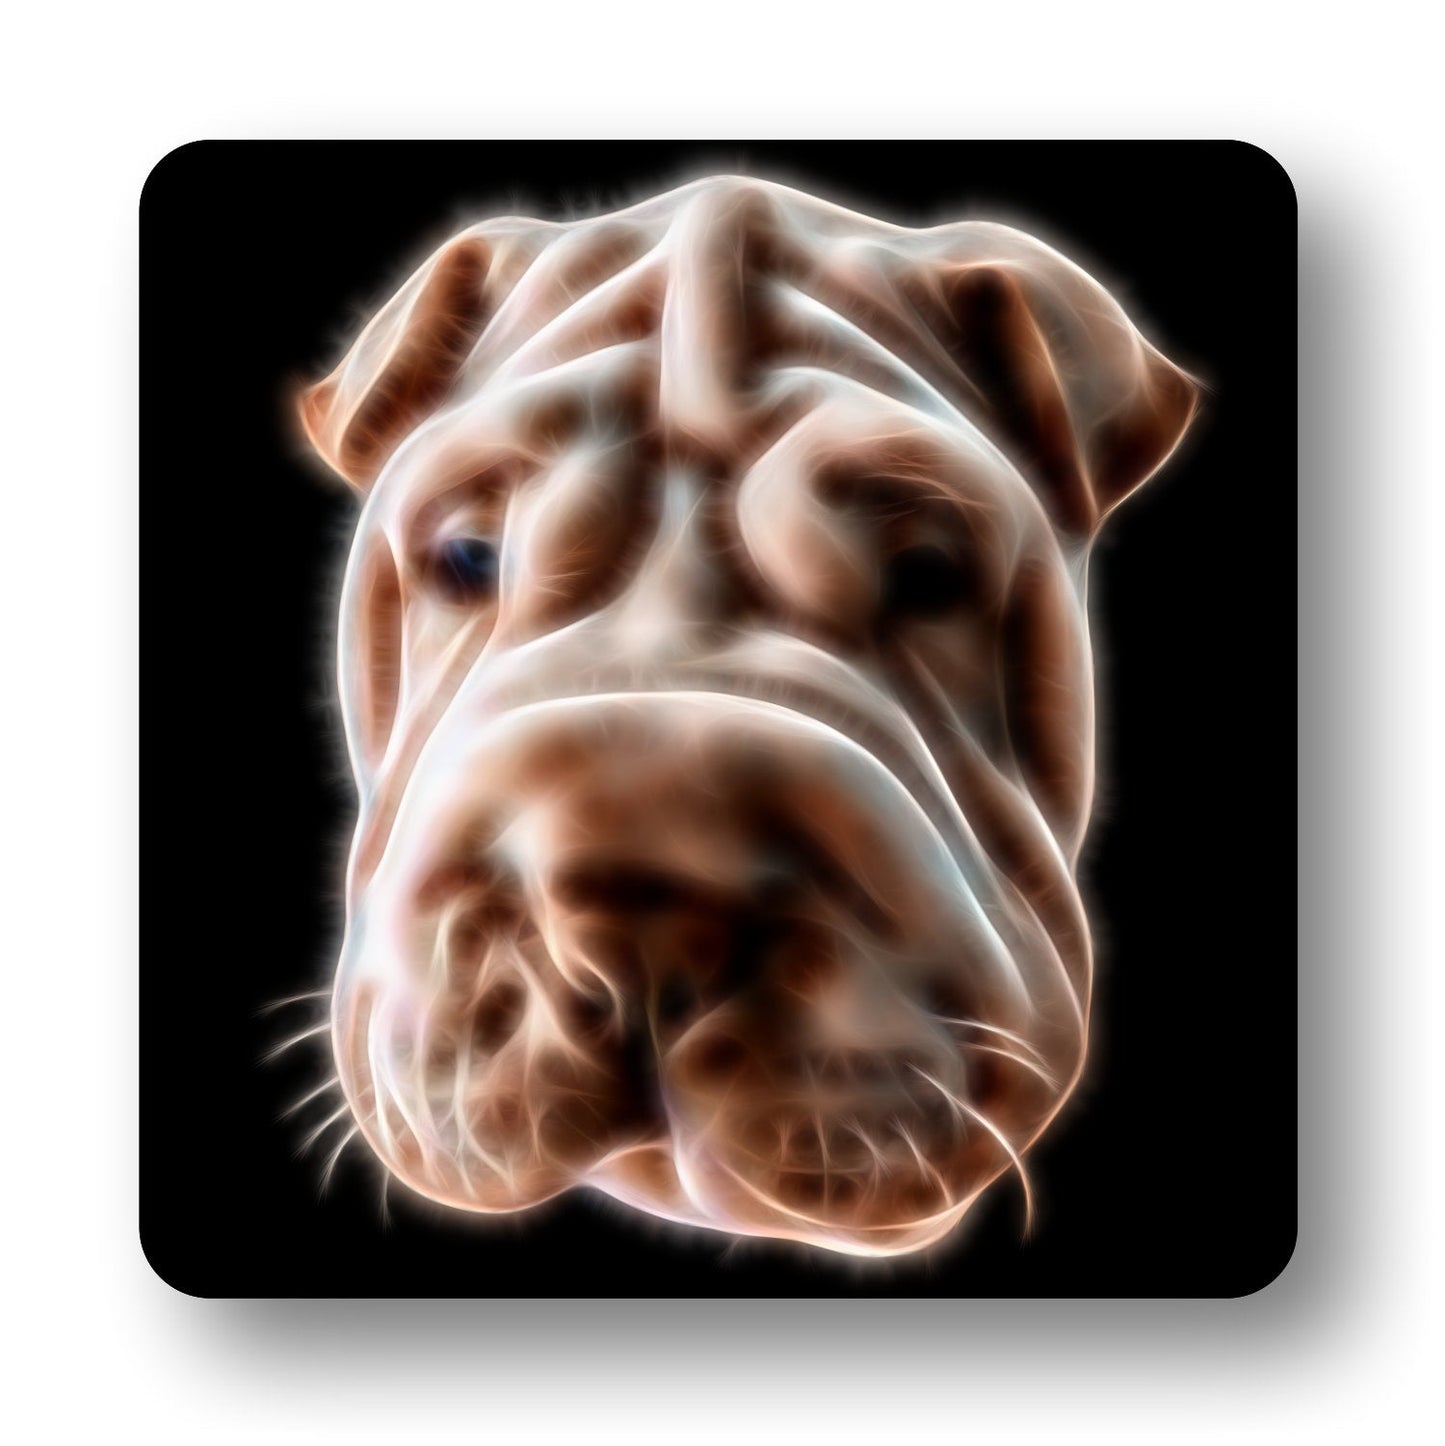 Shar Pei Metal Wall Plaque with Stunning Fractal Art Design. Also available as Mouse Pad,, Keychain, or Coaster.